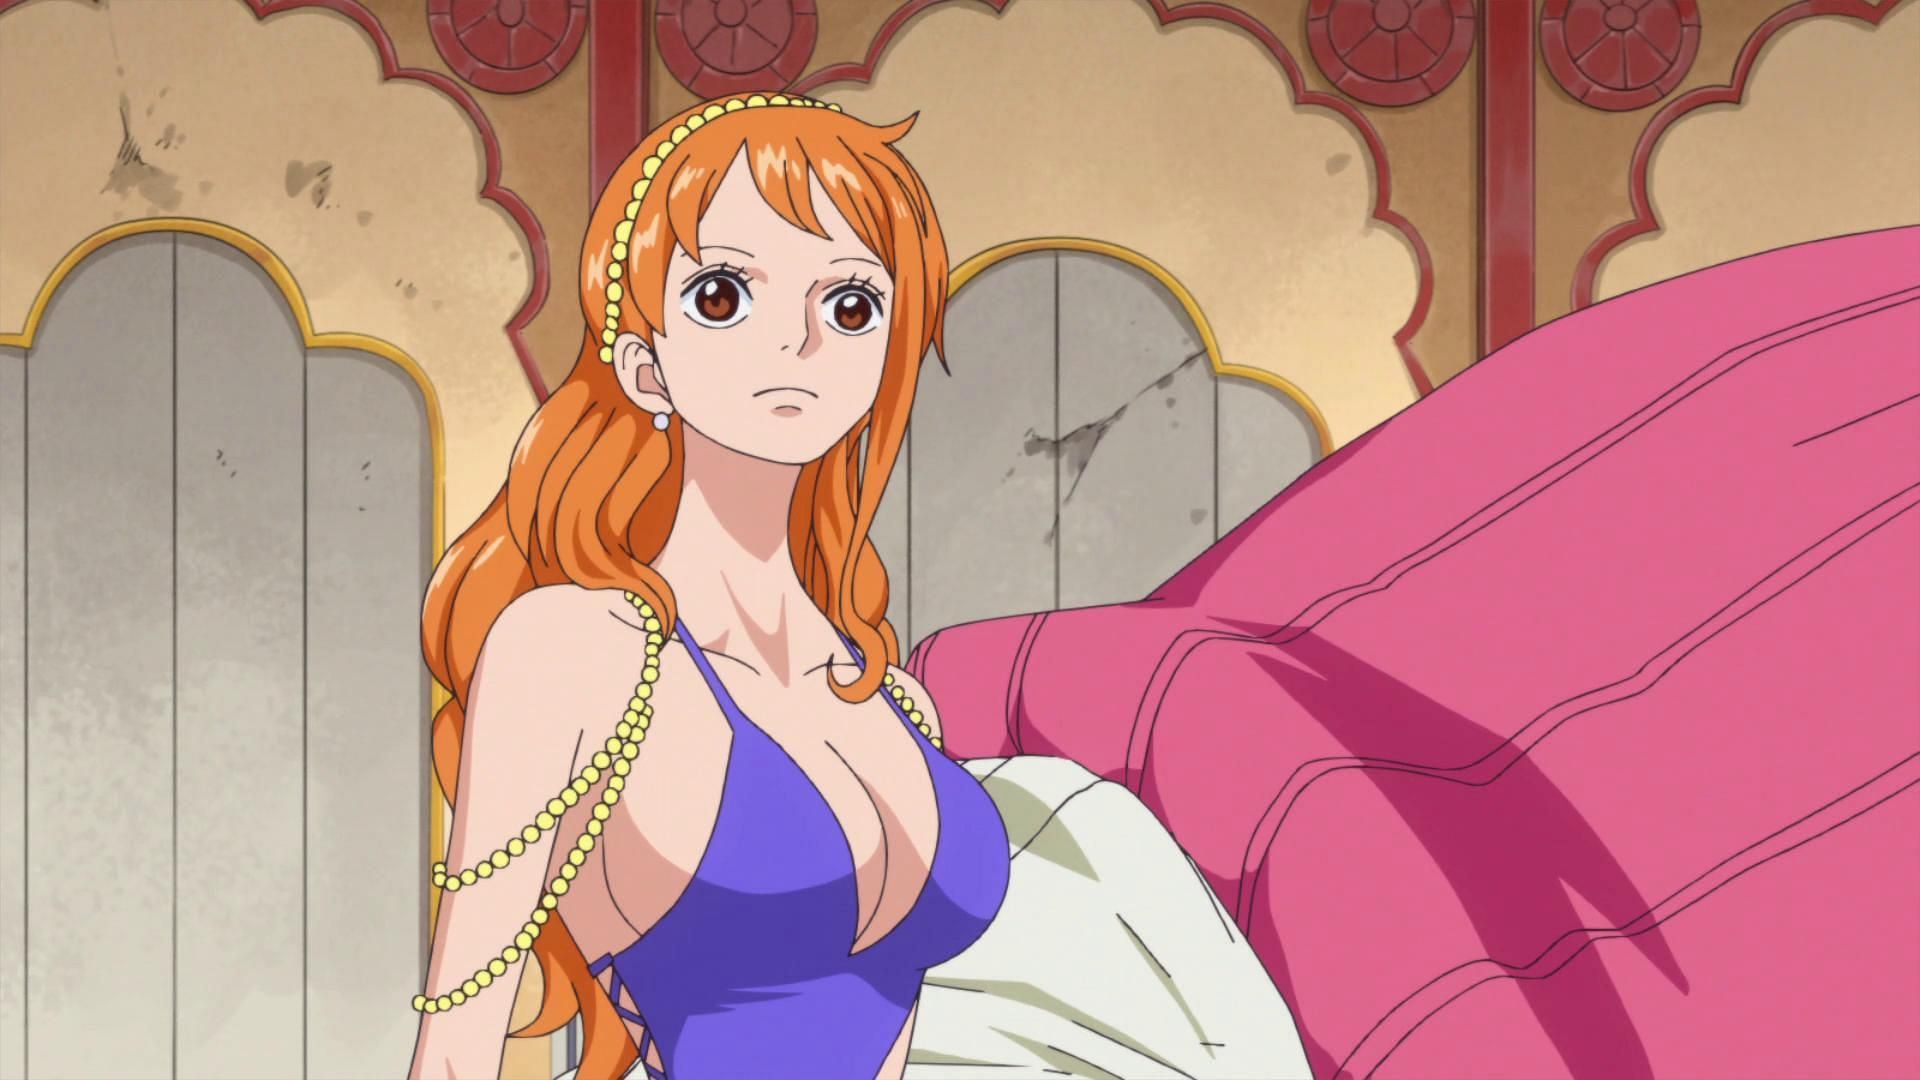 Nami in her Zou outfit (Image via Toei Animation, One Piece)